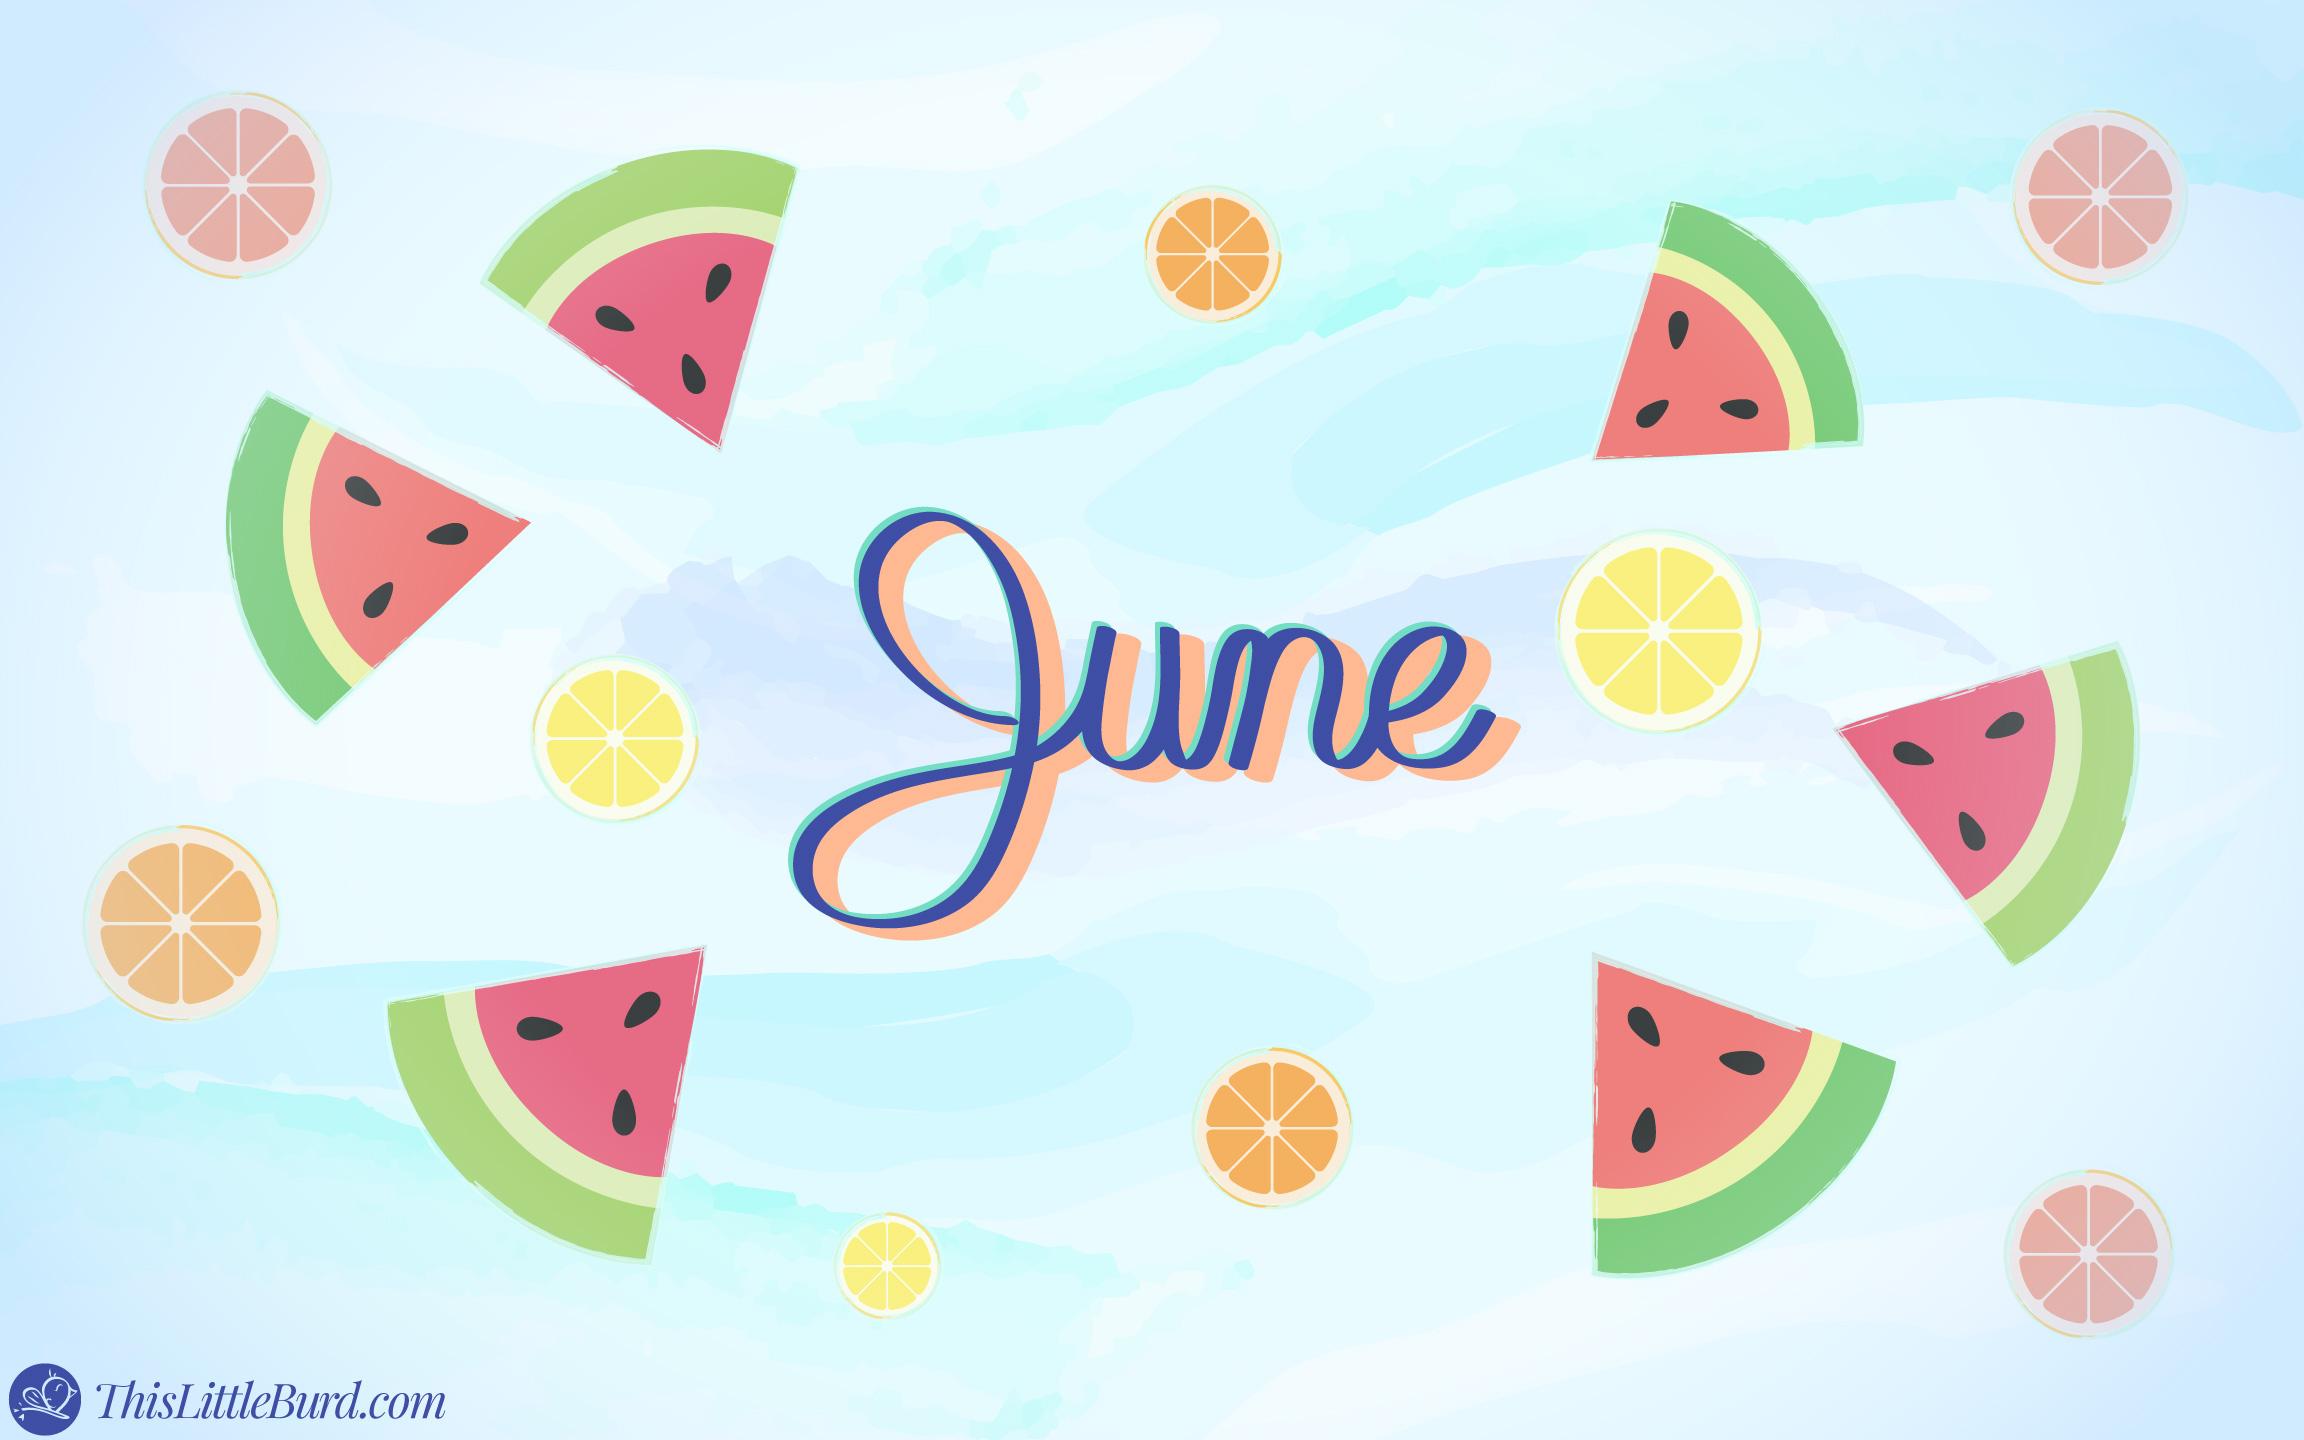 Our June Wallpaper is Here